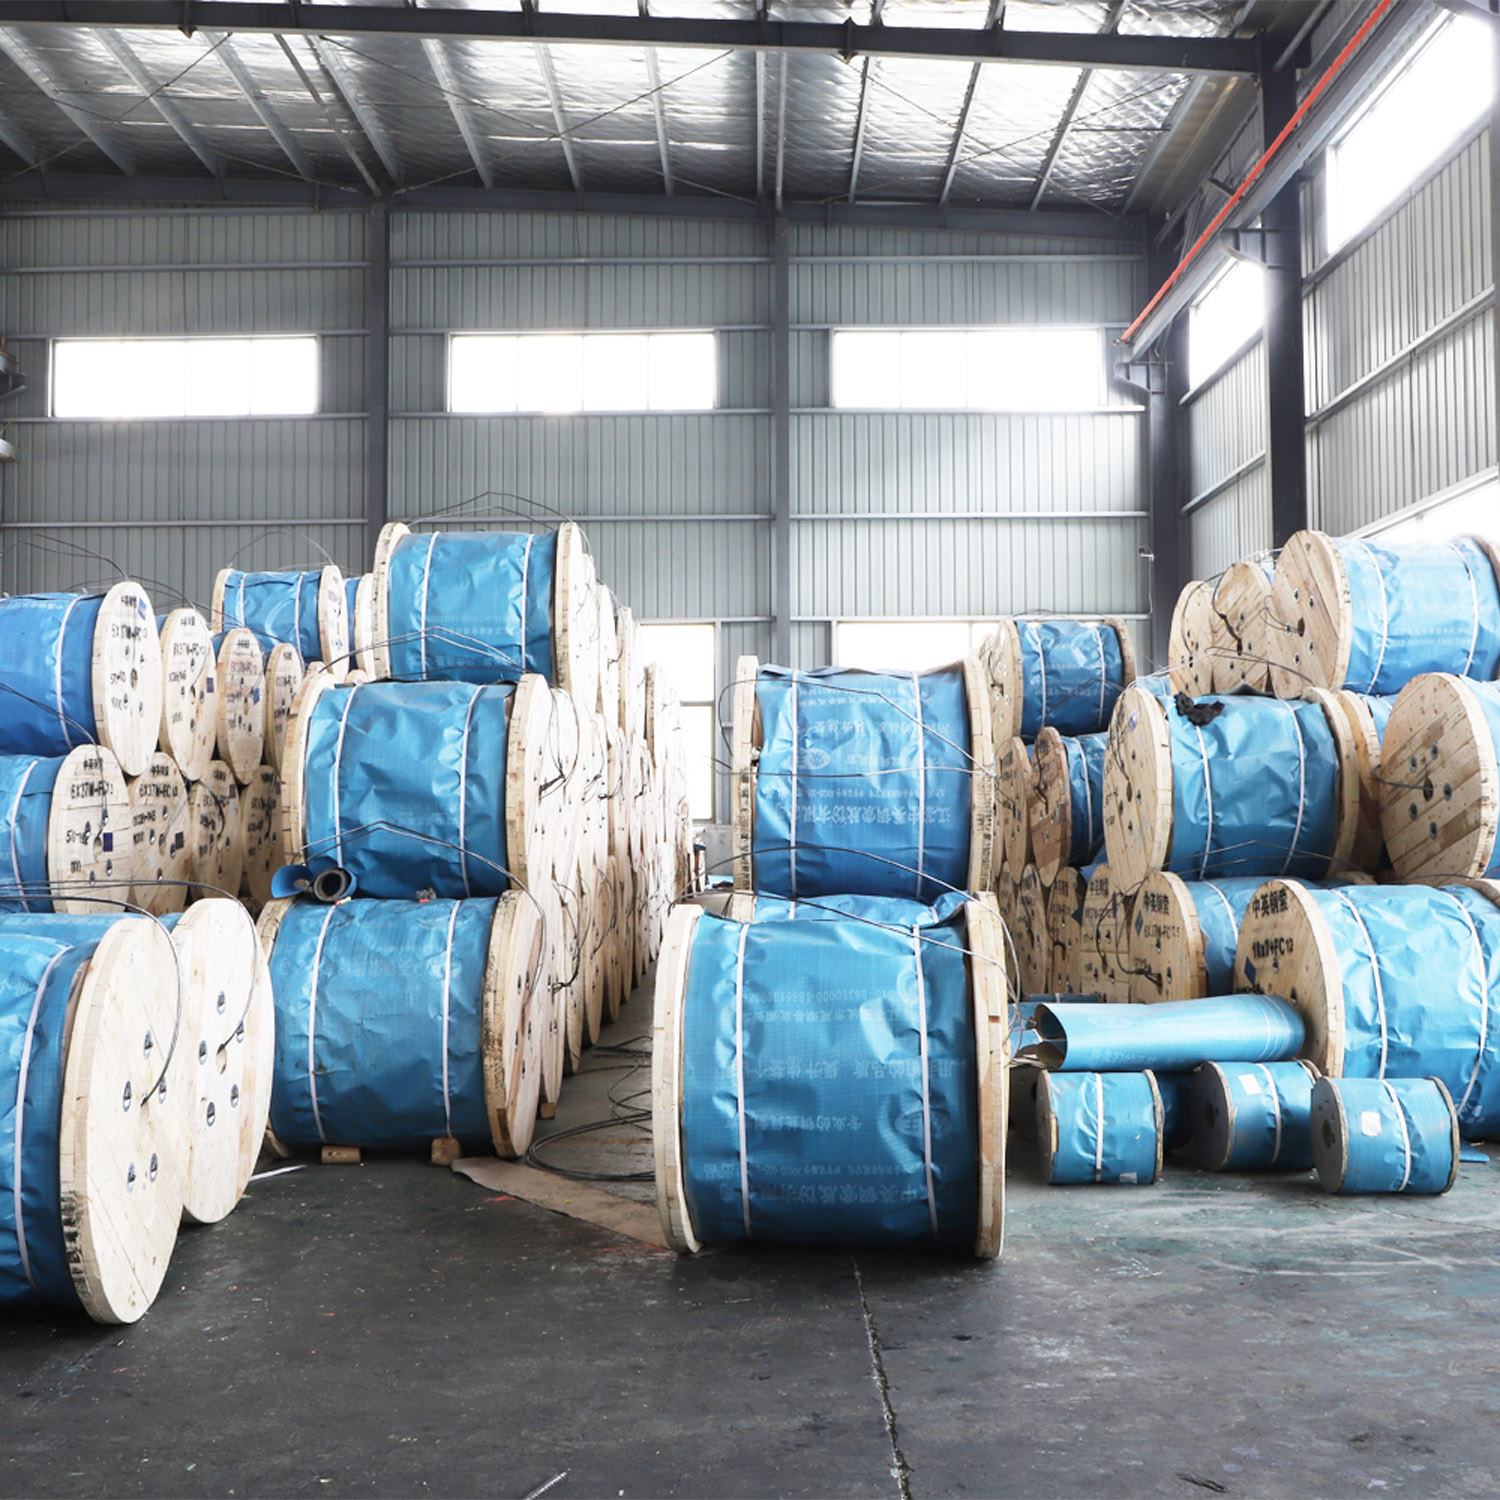 High Strength Galvanized Steel wire rope 1/2" Usage For Carbon Steel Products Manufacturer